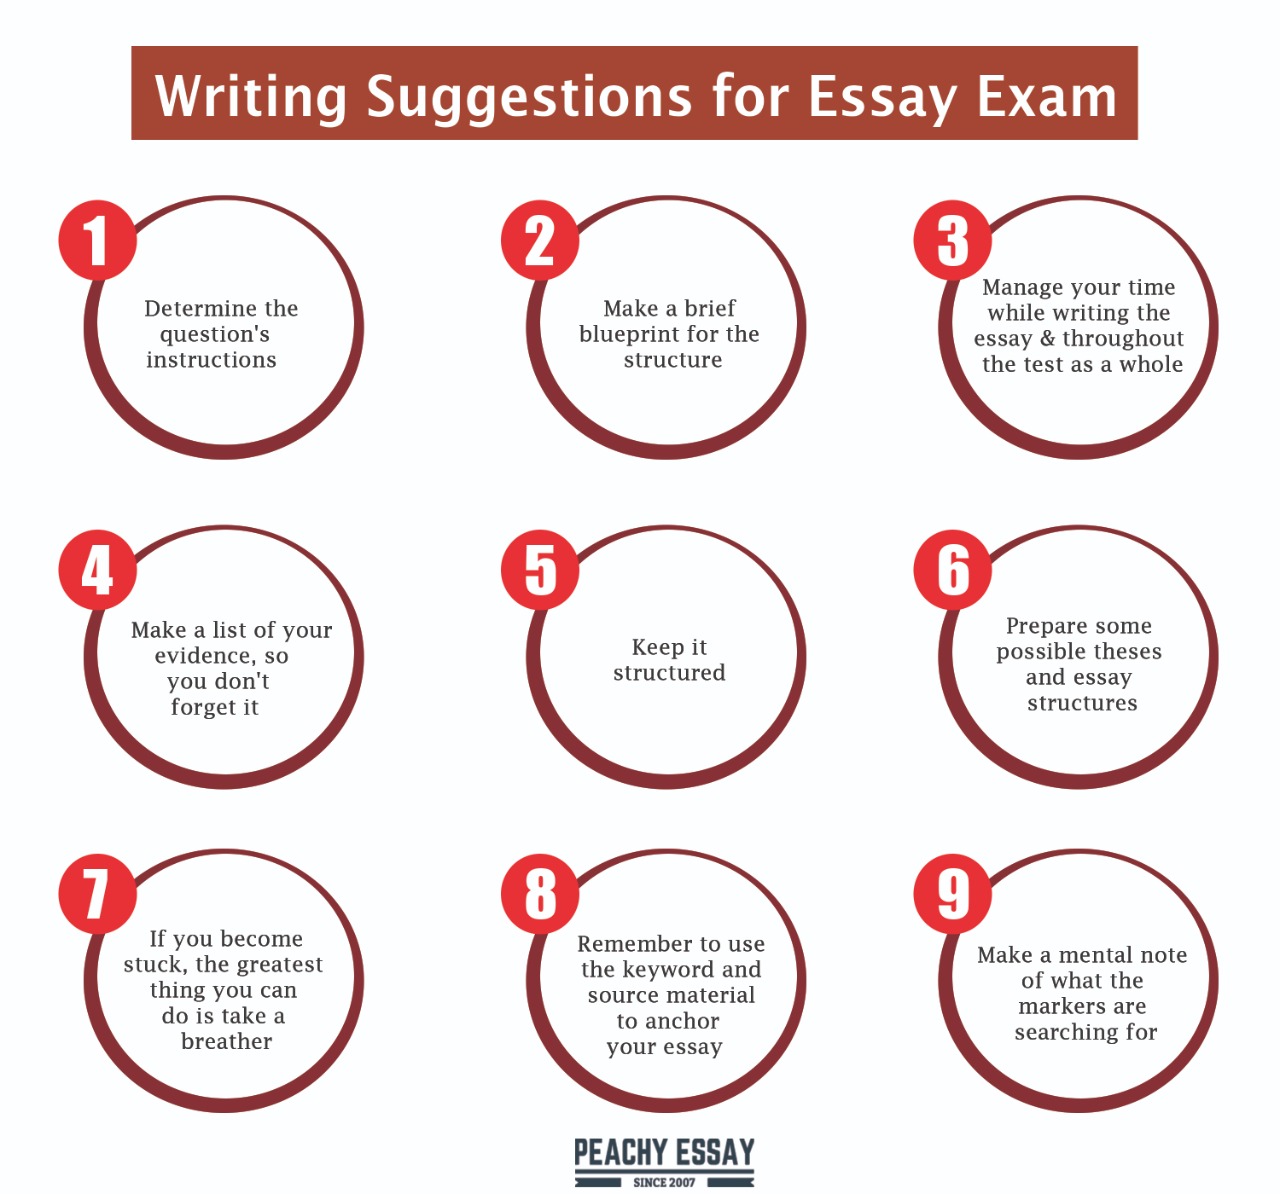 tips for writing an essay during exam